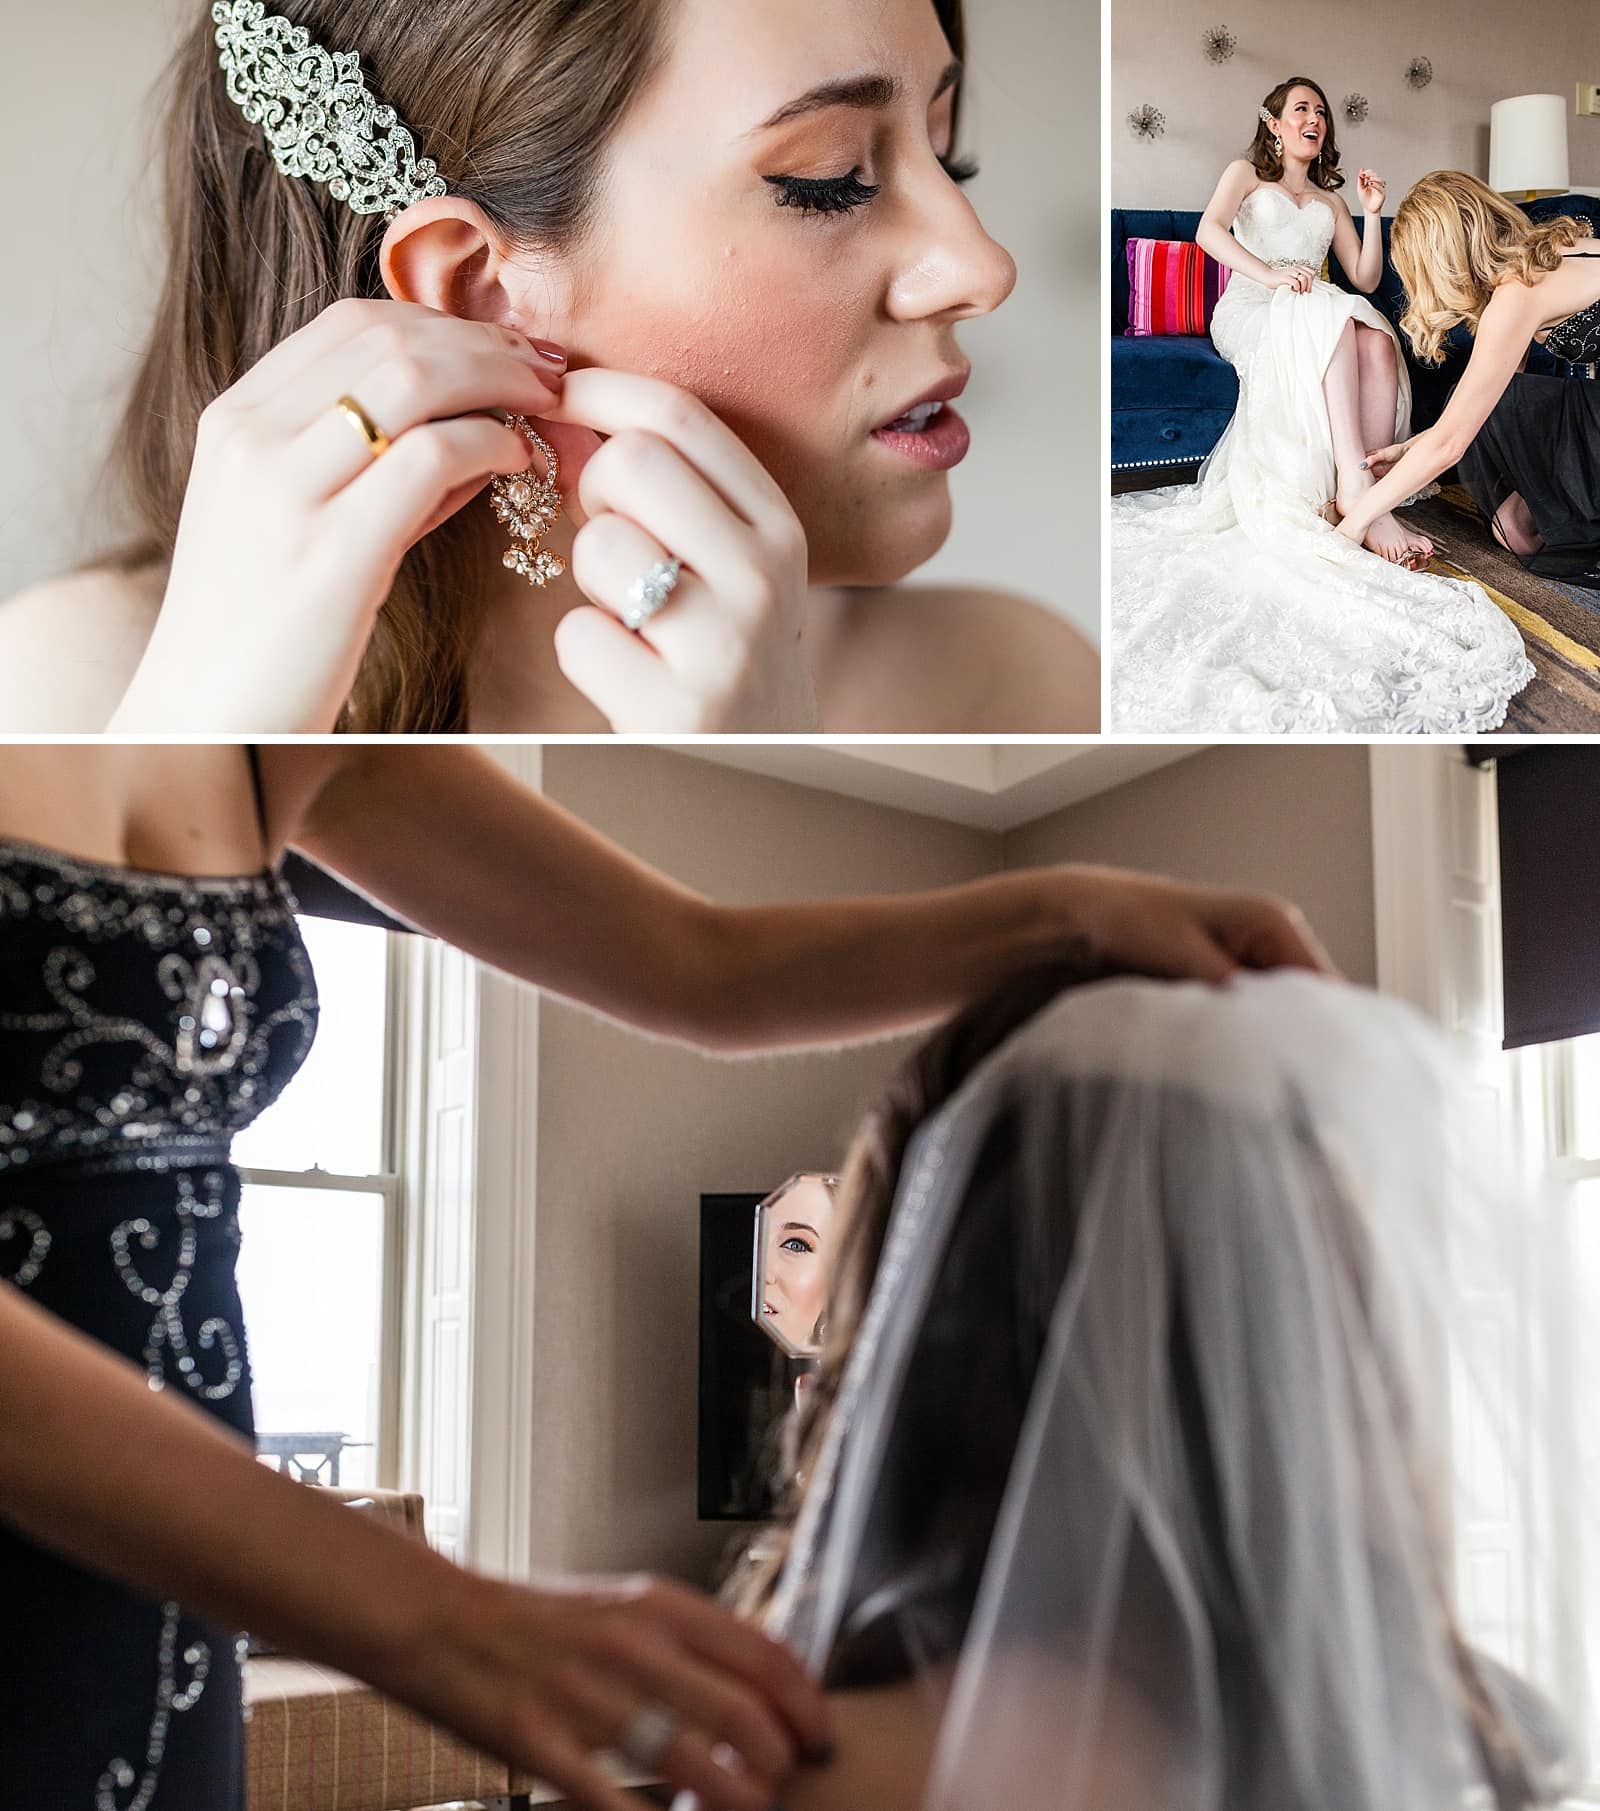 Bride putting on shoes, earrings, and veil with the help of her bridesmaids